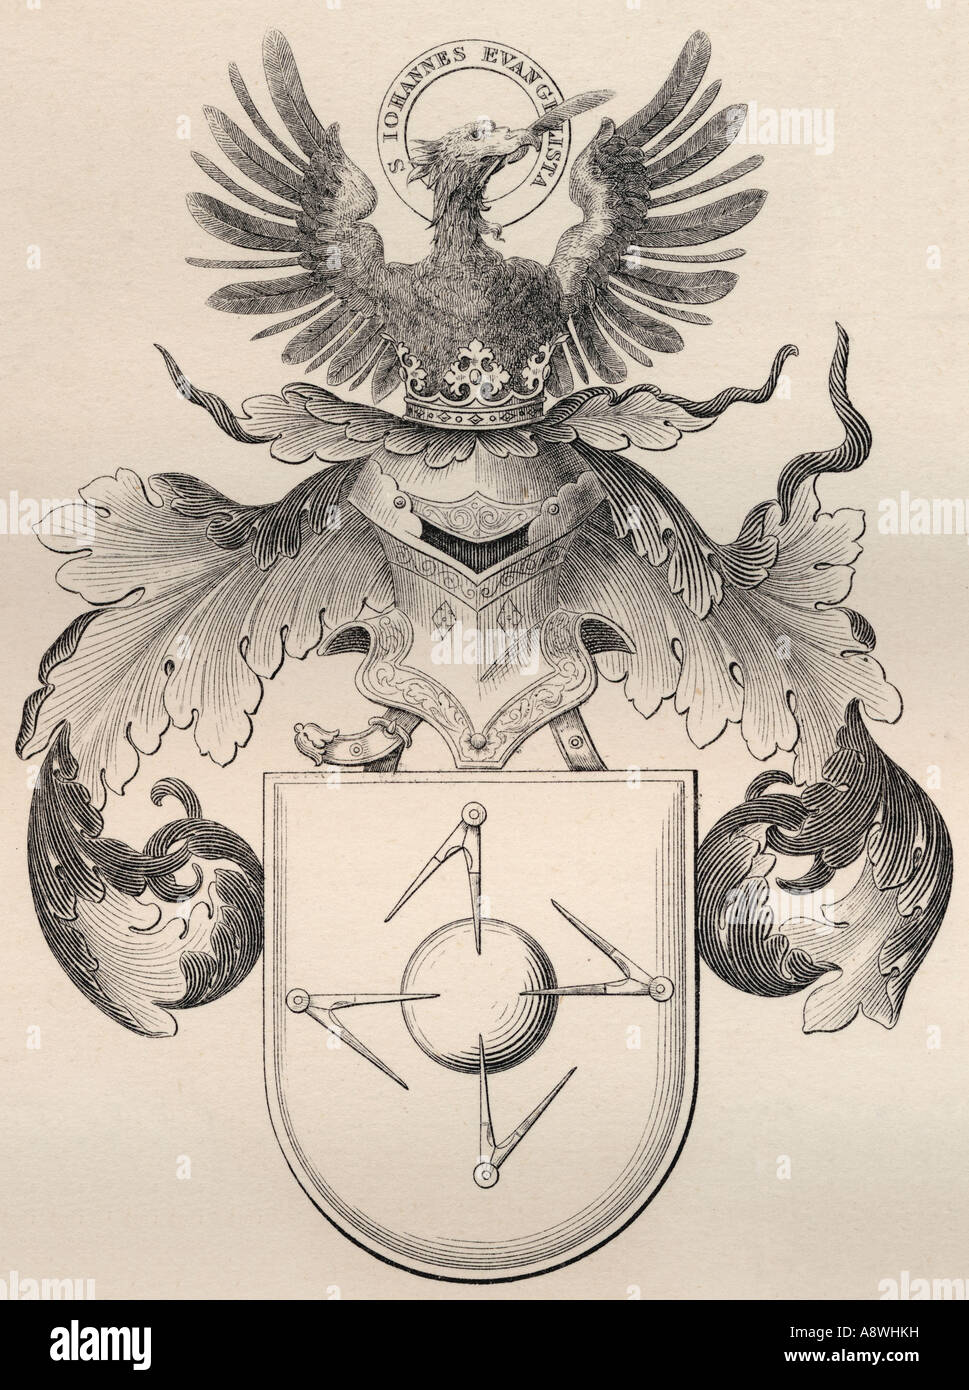 Arms of the German Masons. From an old drawing, A.D. 1515. Stock Photo